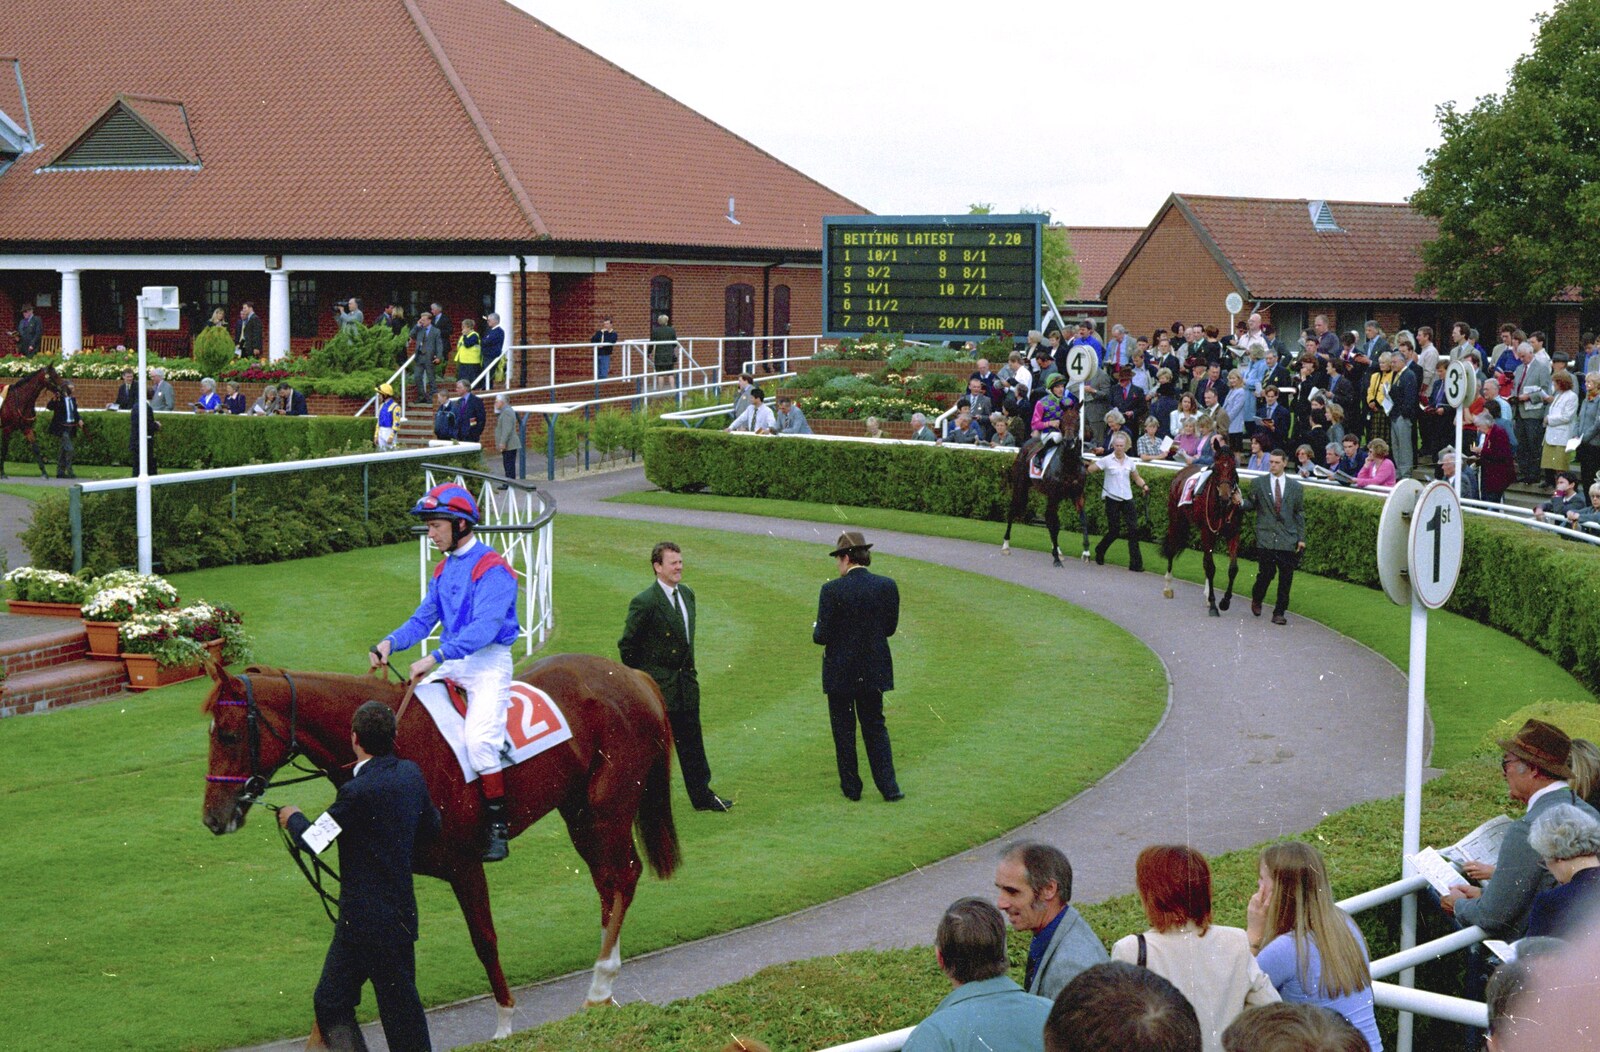 The paddock at Newmarket from 3G Lab Goes to the Races, Newmarket, Suffolk - 15th July 2001